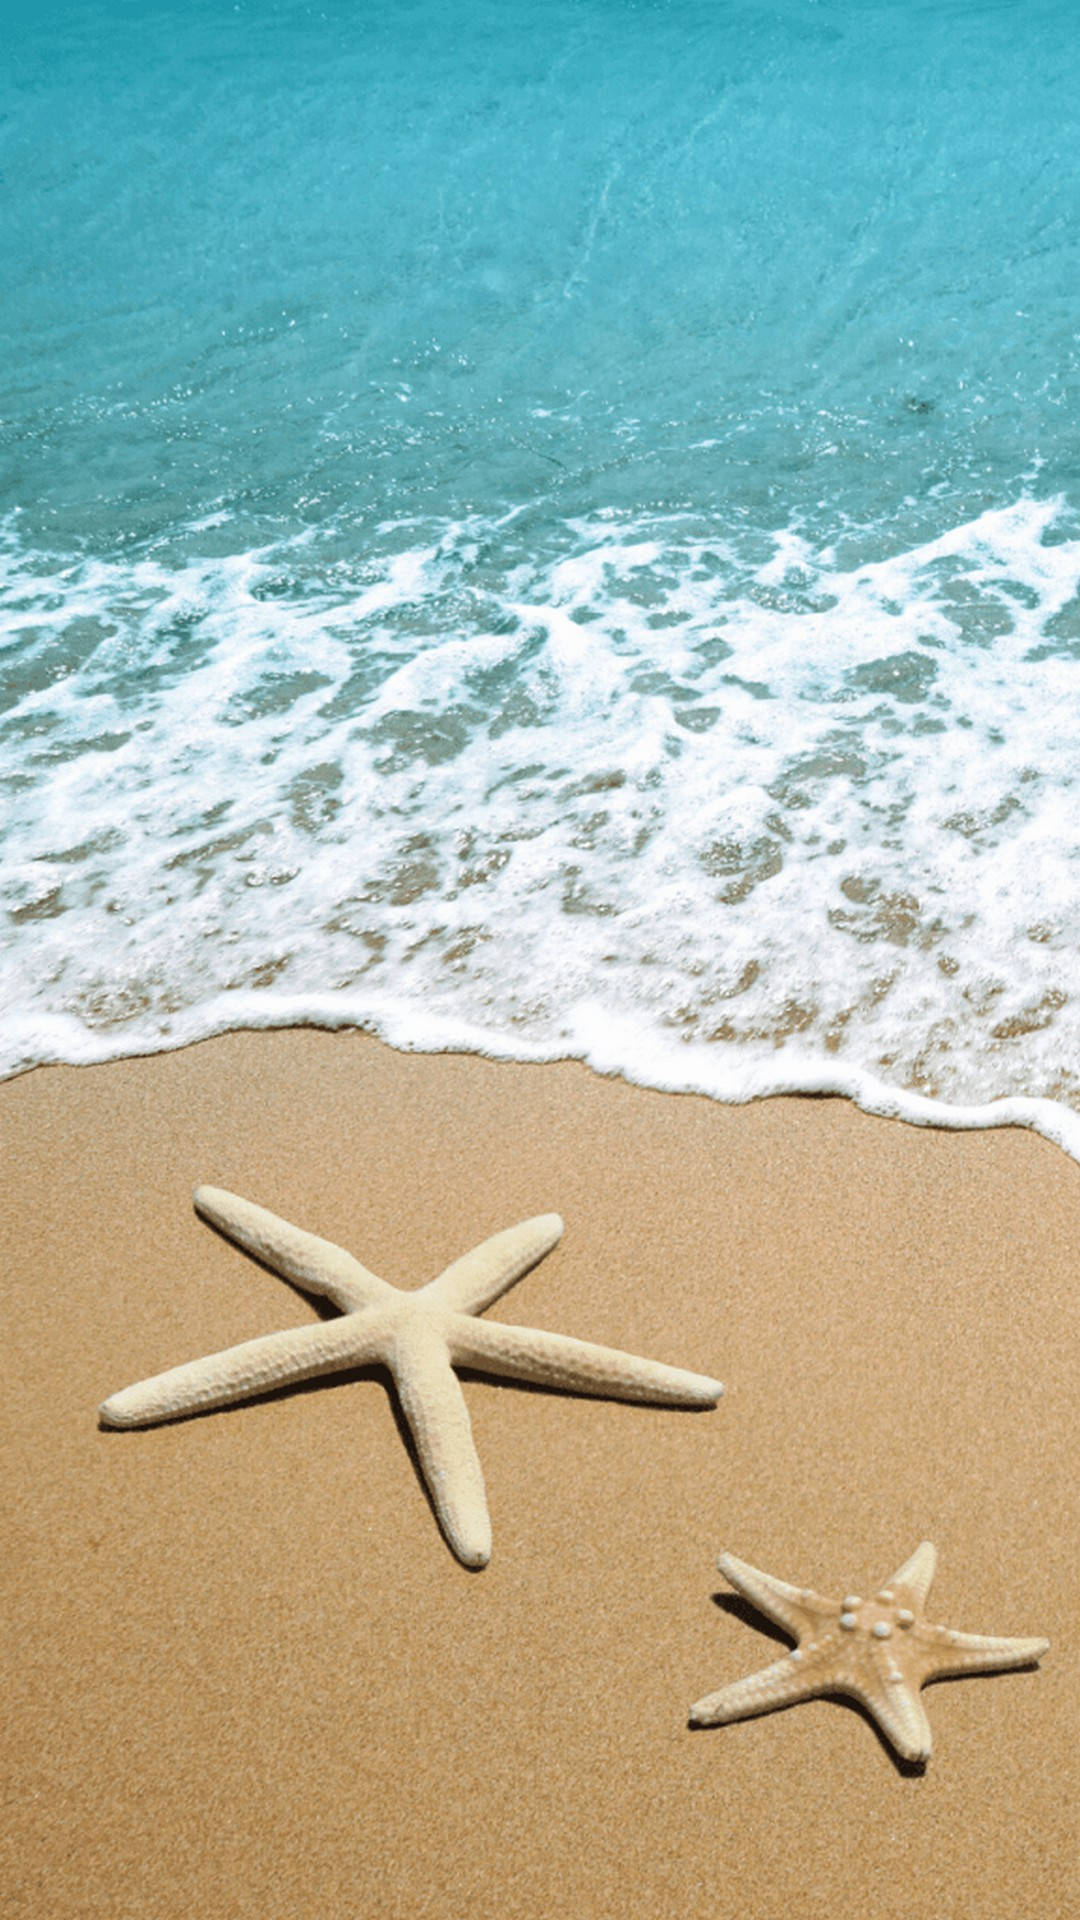 Star Fish Wallpapers Starfish Wallpapers Background Pictures Starfish  Background Image And Wallpaper for Free Download